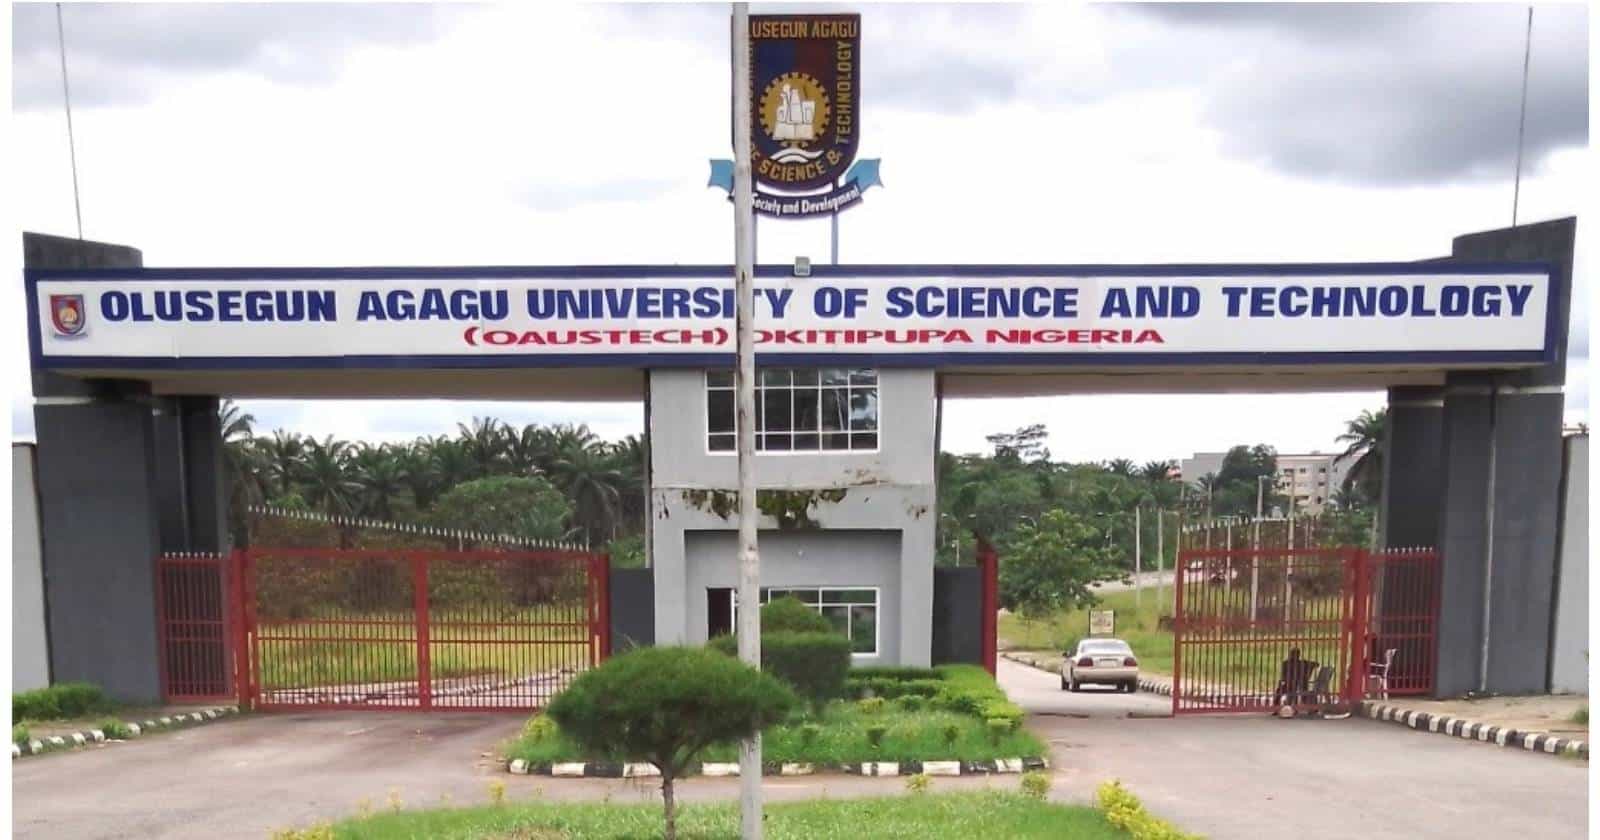 Olusegun Agagu University of Science and Technology (OAUSTECH) Admission List